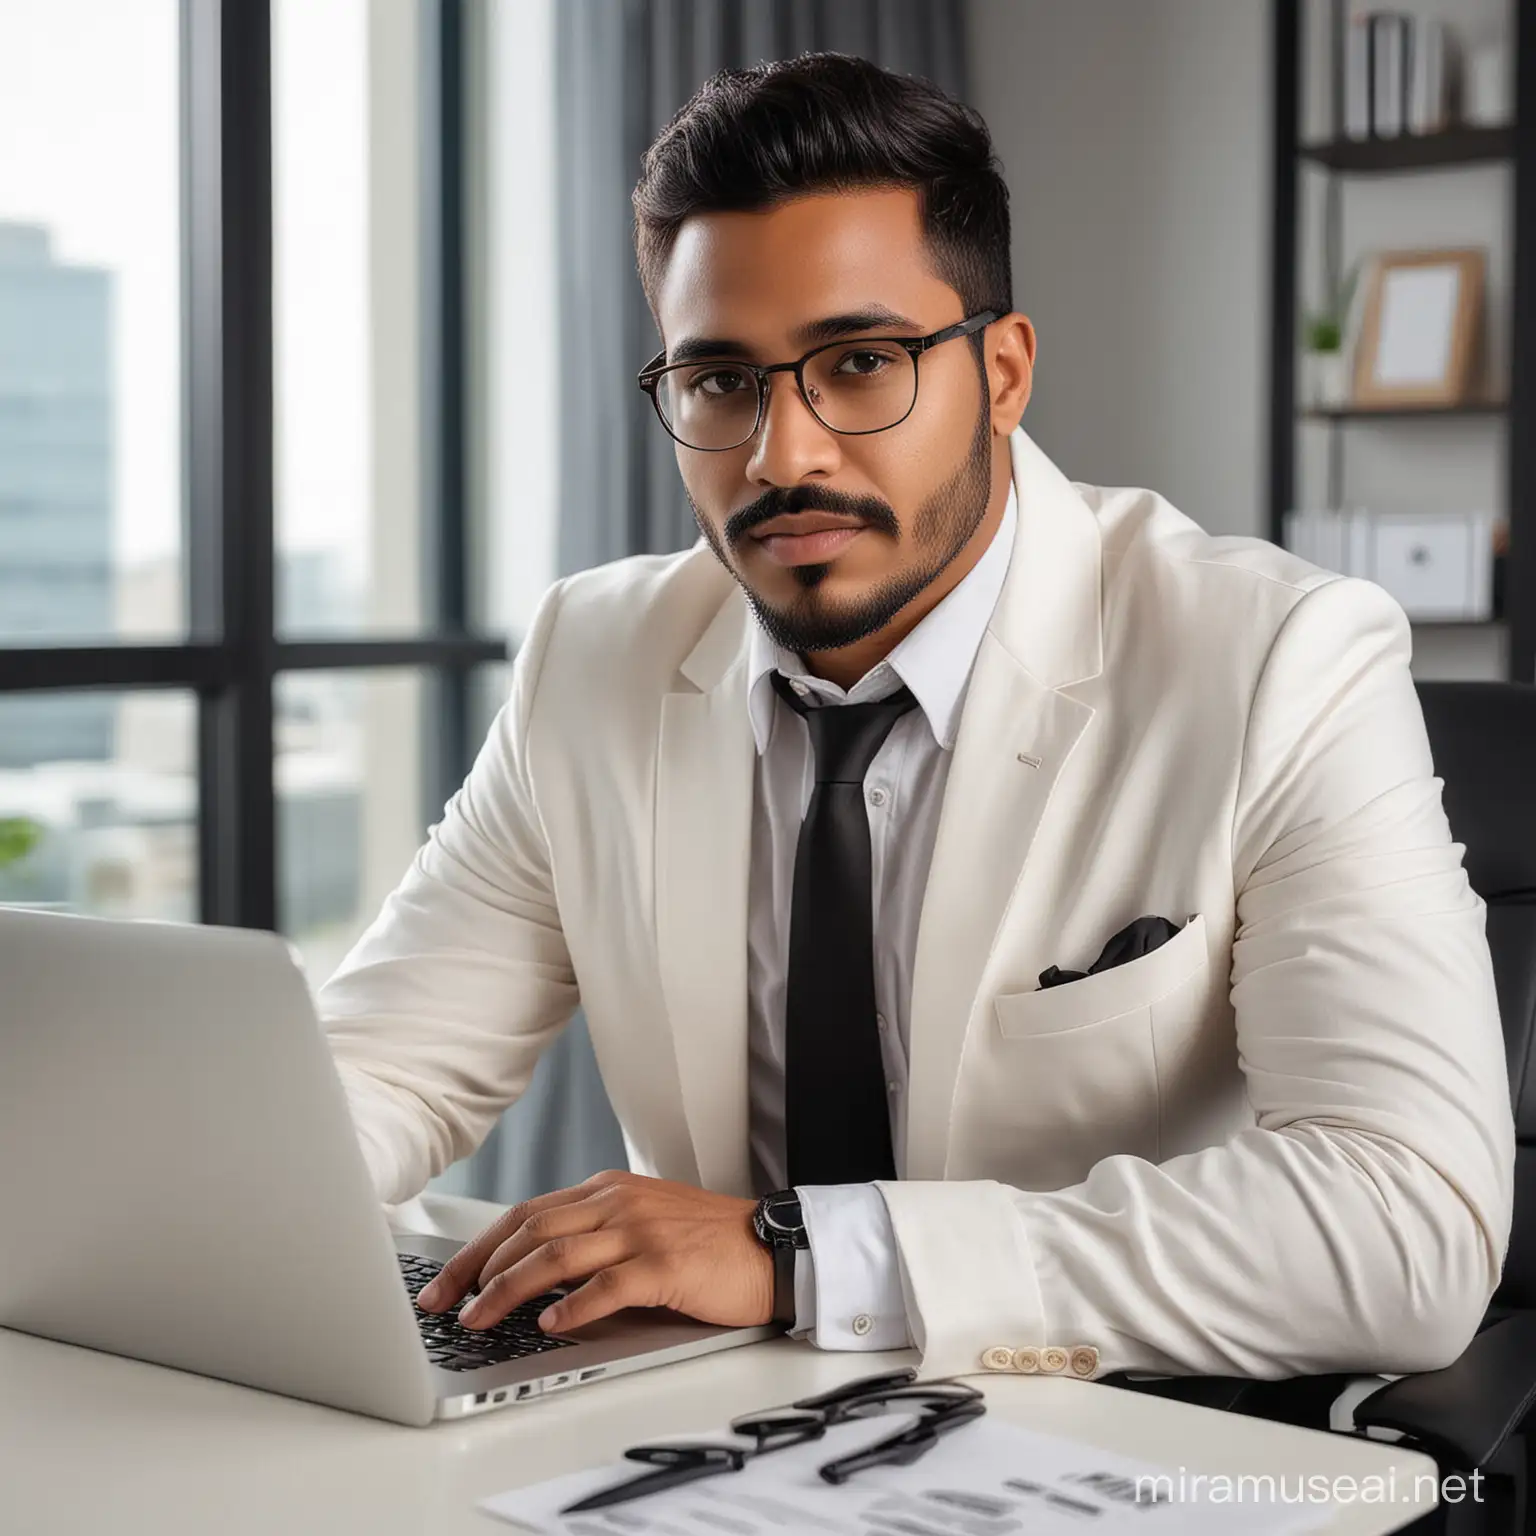 A brown coloured man with 85 kg with mustache and wearing white blazer and black shirt sitting on office table with modern background and open window and a laptop in side. And wearing profesional specs like business man and with a little curl hairstyle.